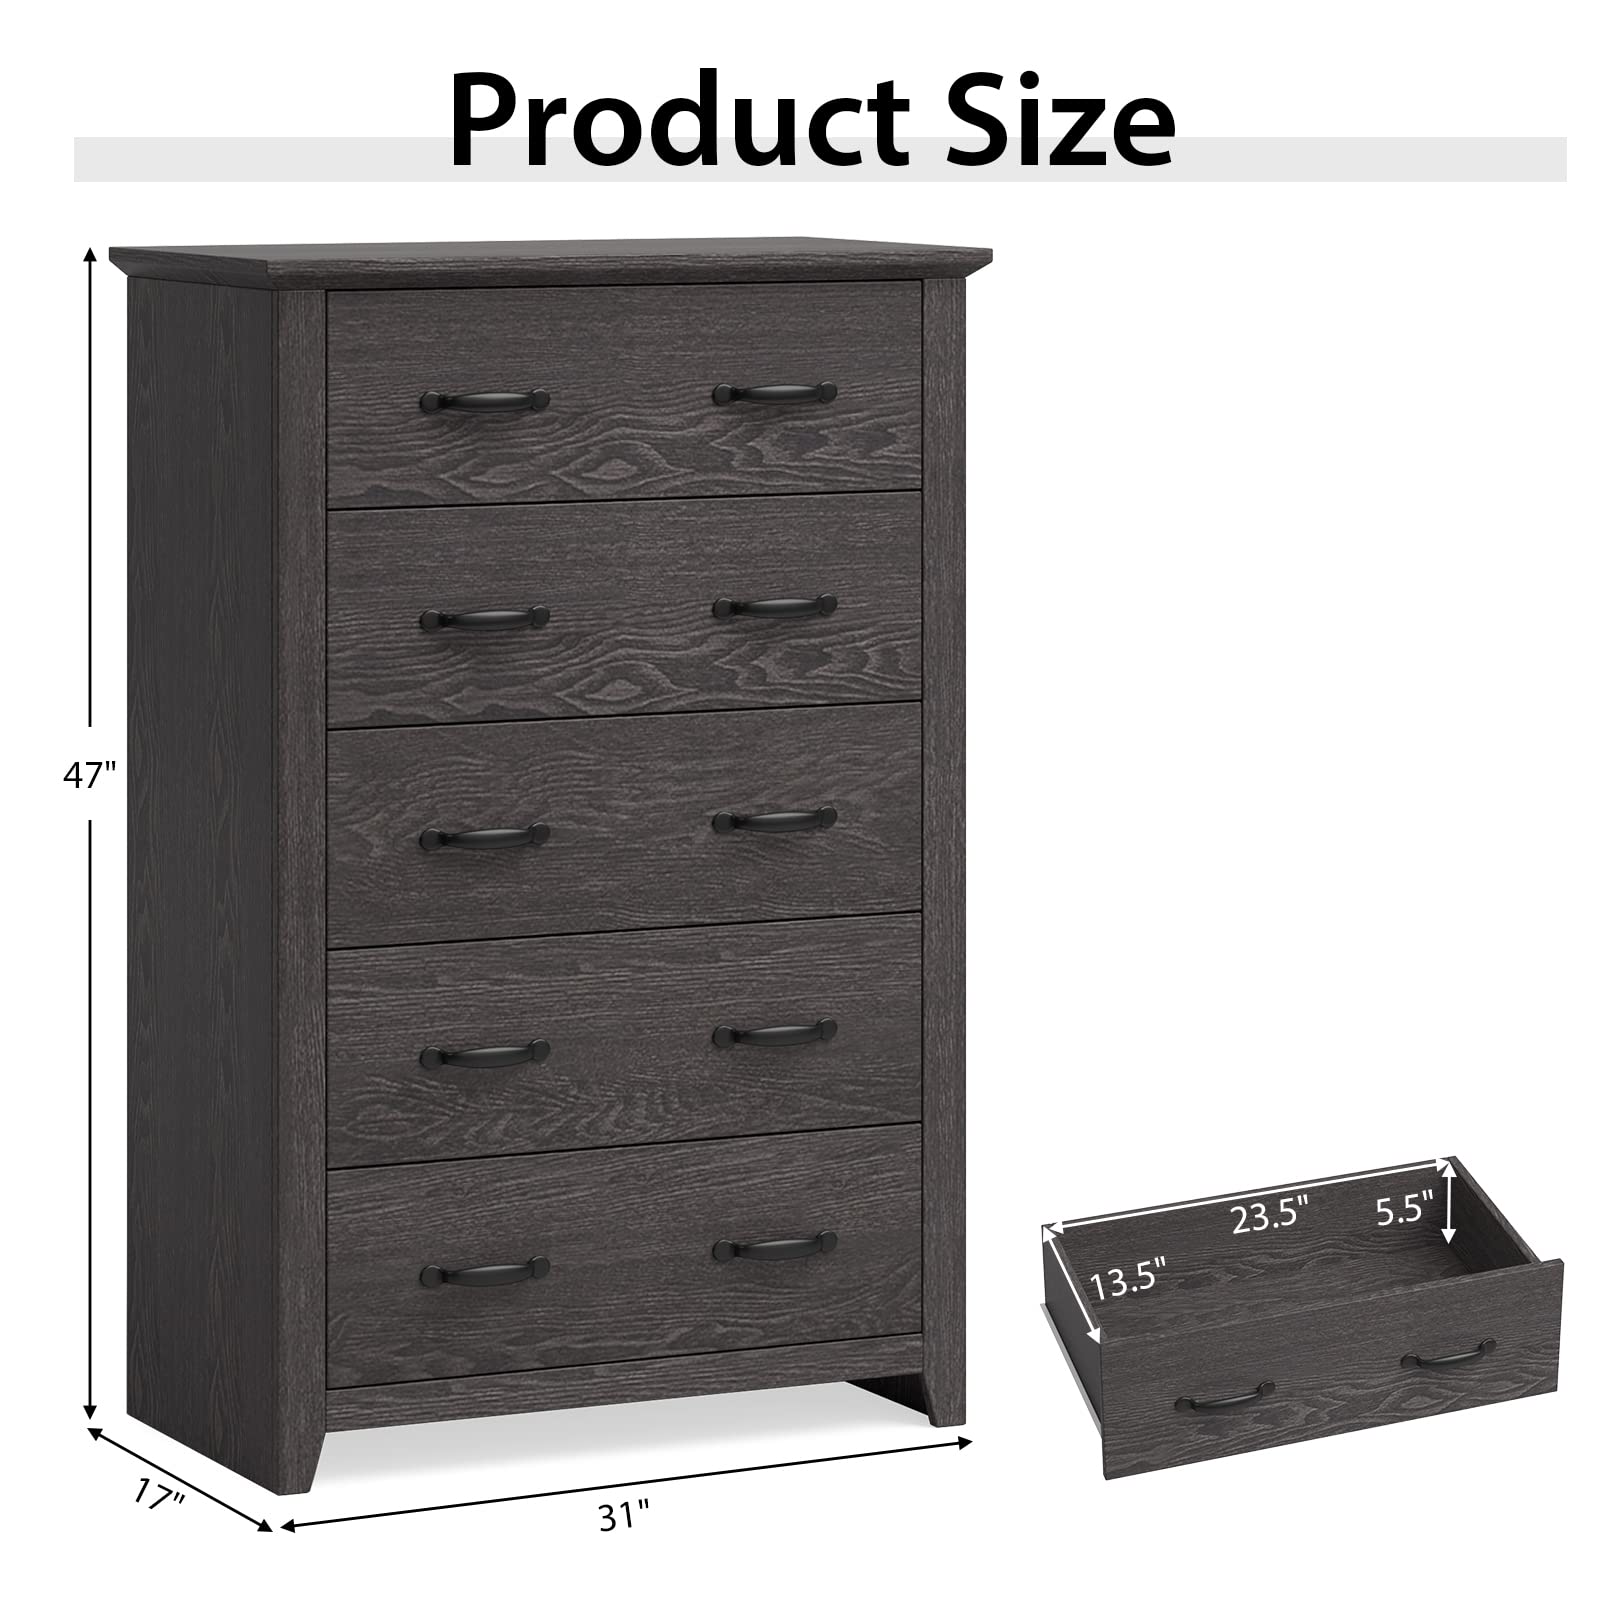 Giantex 5 Drawer Dresser Chest of Drawers - Vertical Dresser with 5 Pull-Out Drawers for Bedroom, Living Room, Entryway